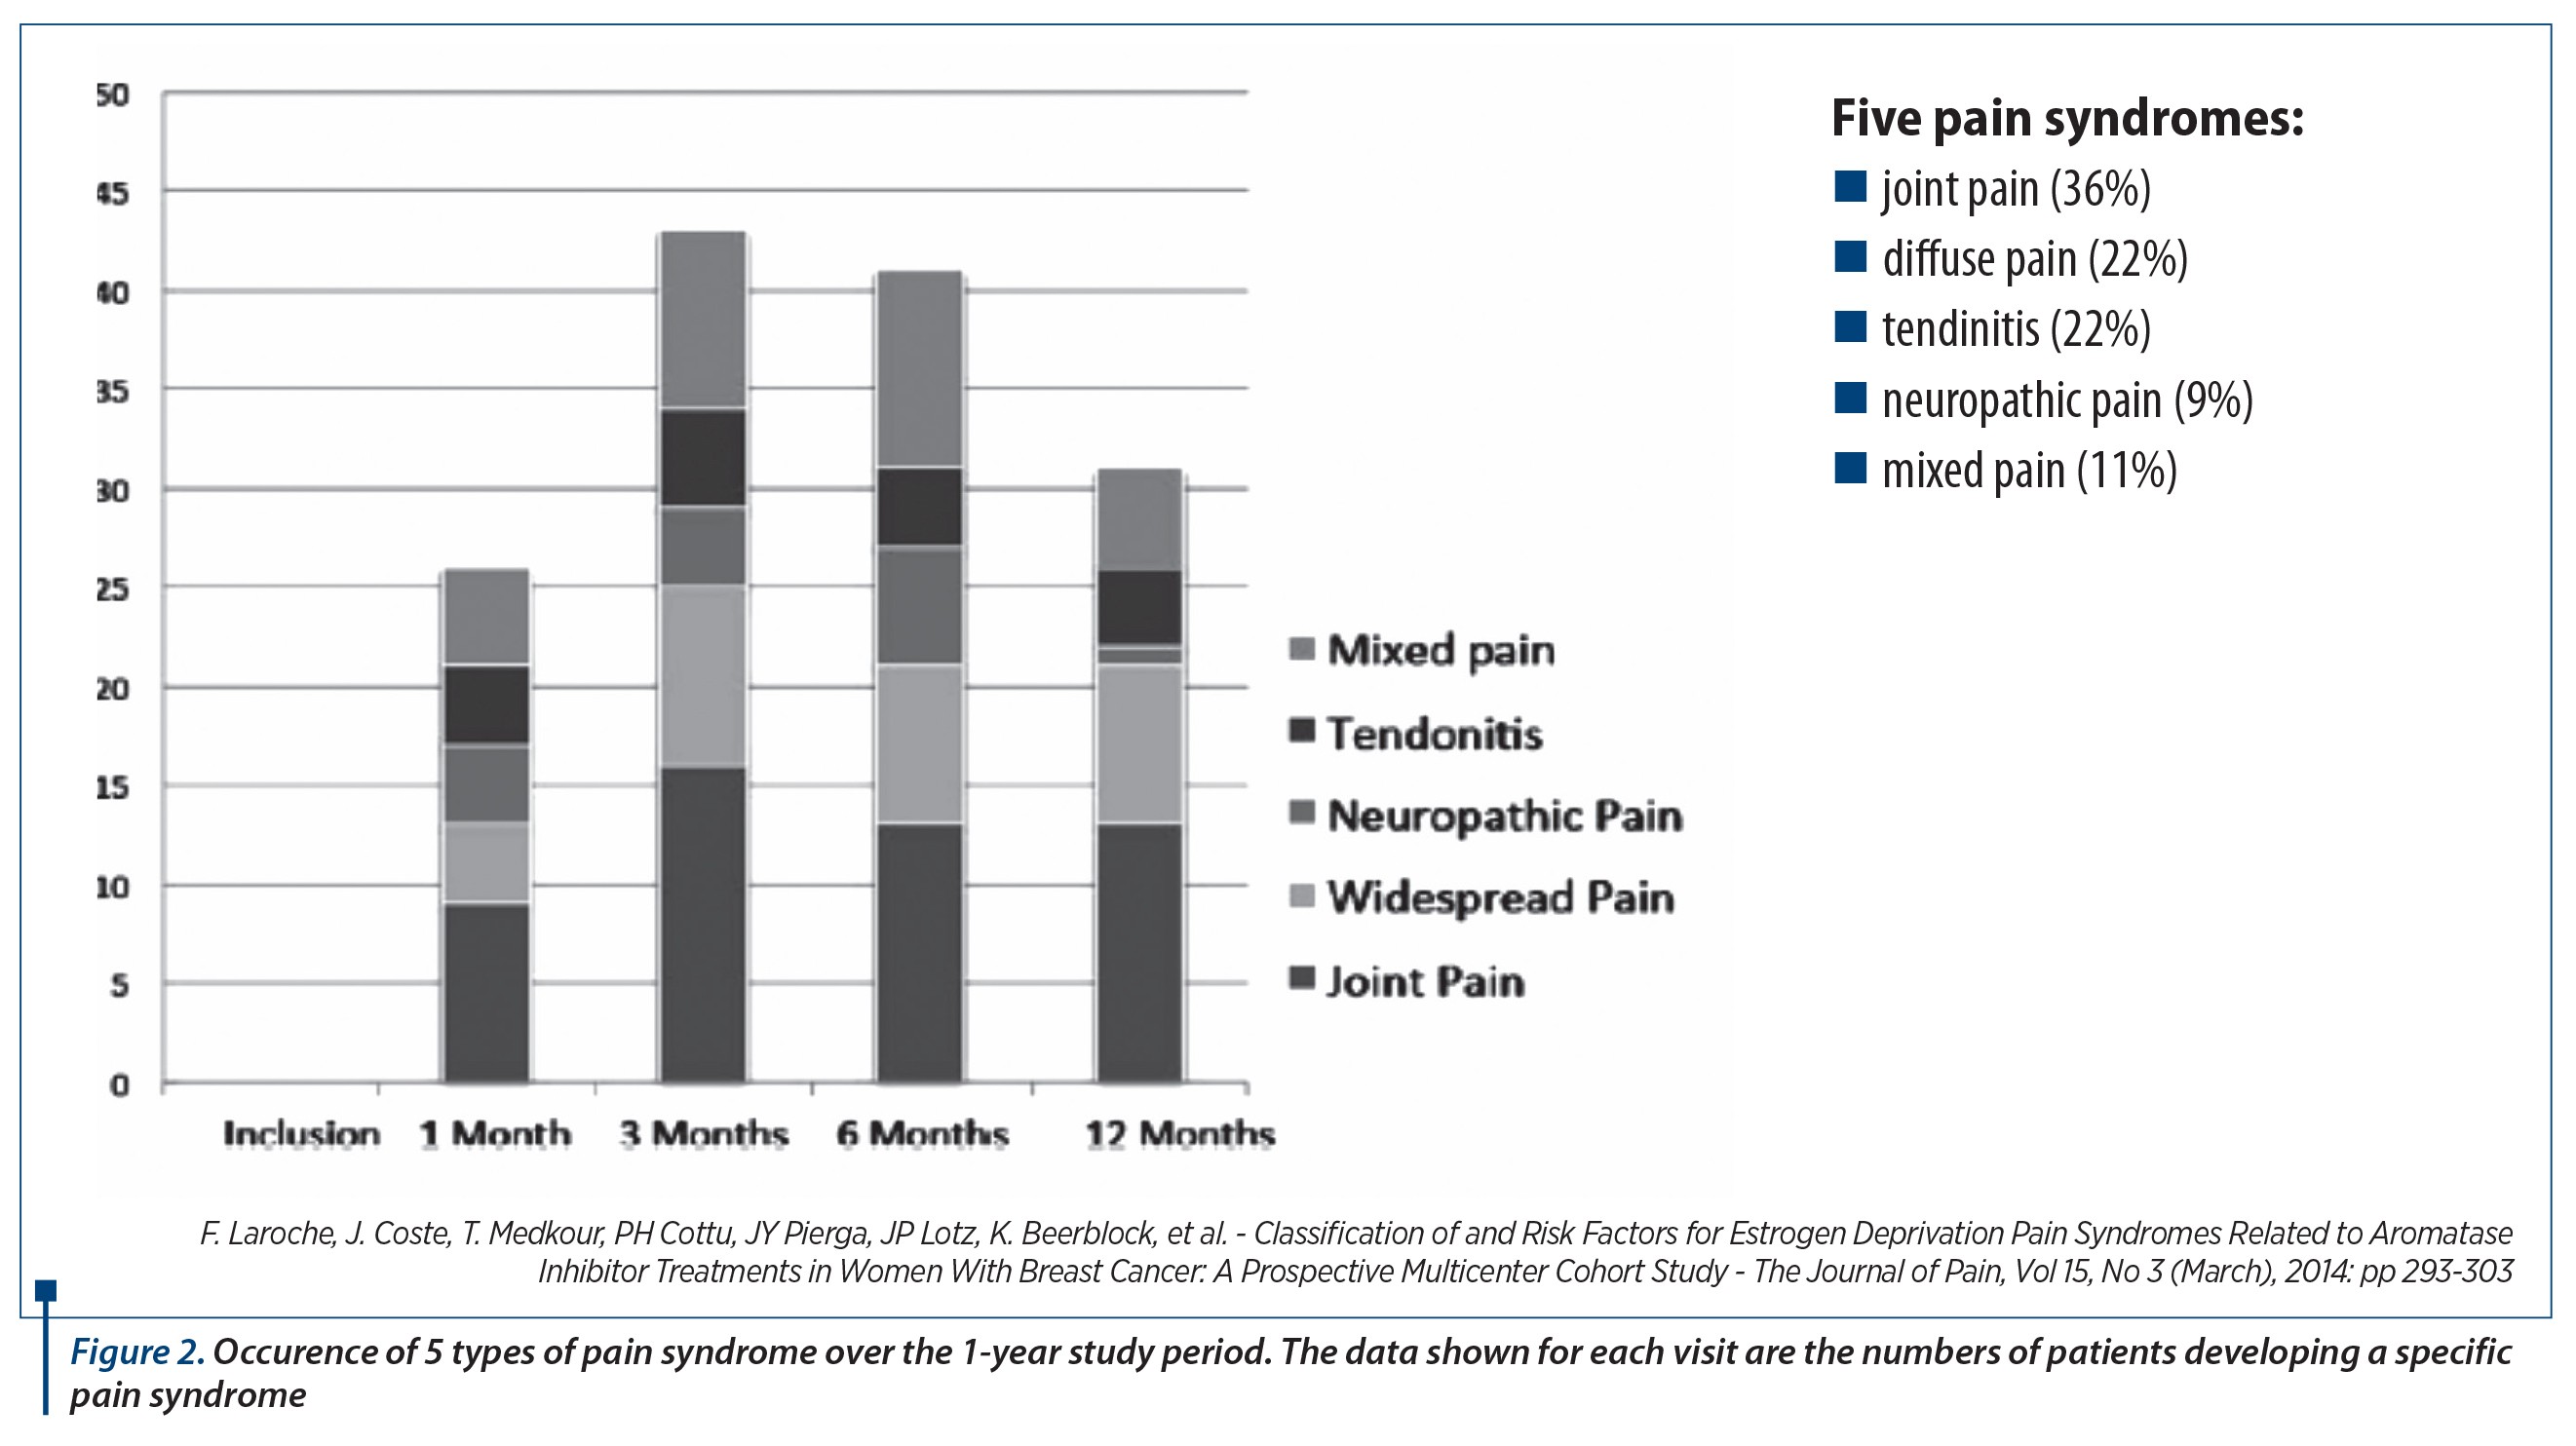 Figure 2. Occurence of 5 types of pain syndrome over the 1-year study period. The data shown for each visit are the numbers of patients developing a specific pain syndrome